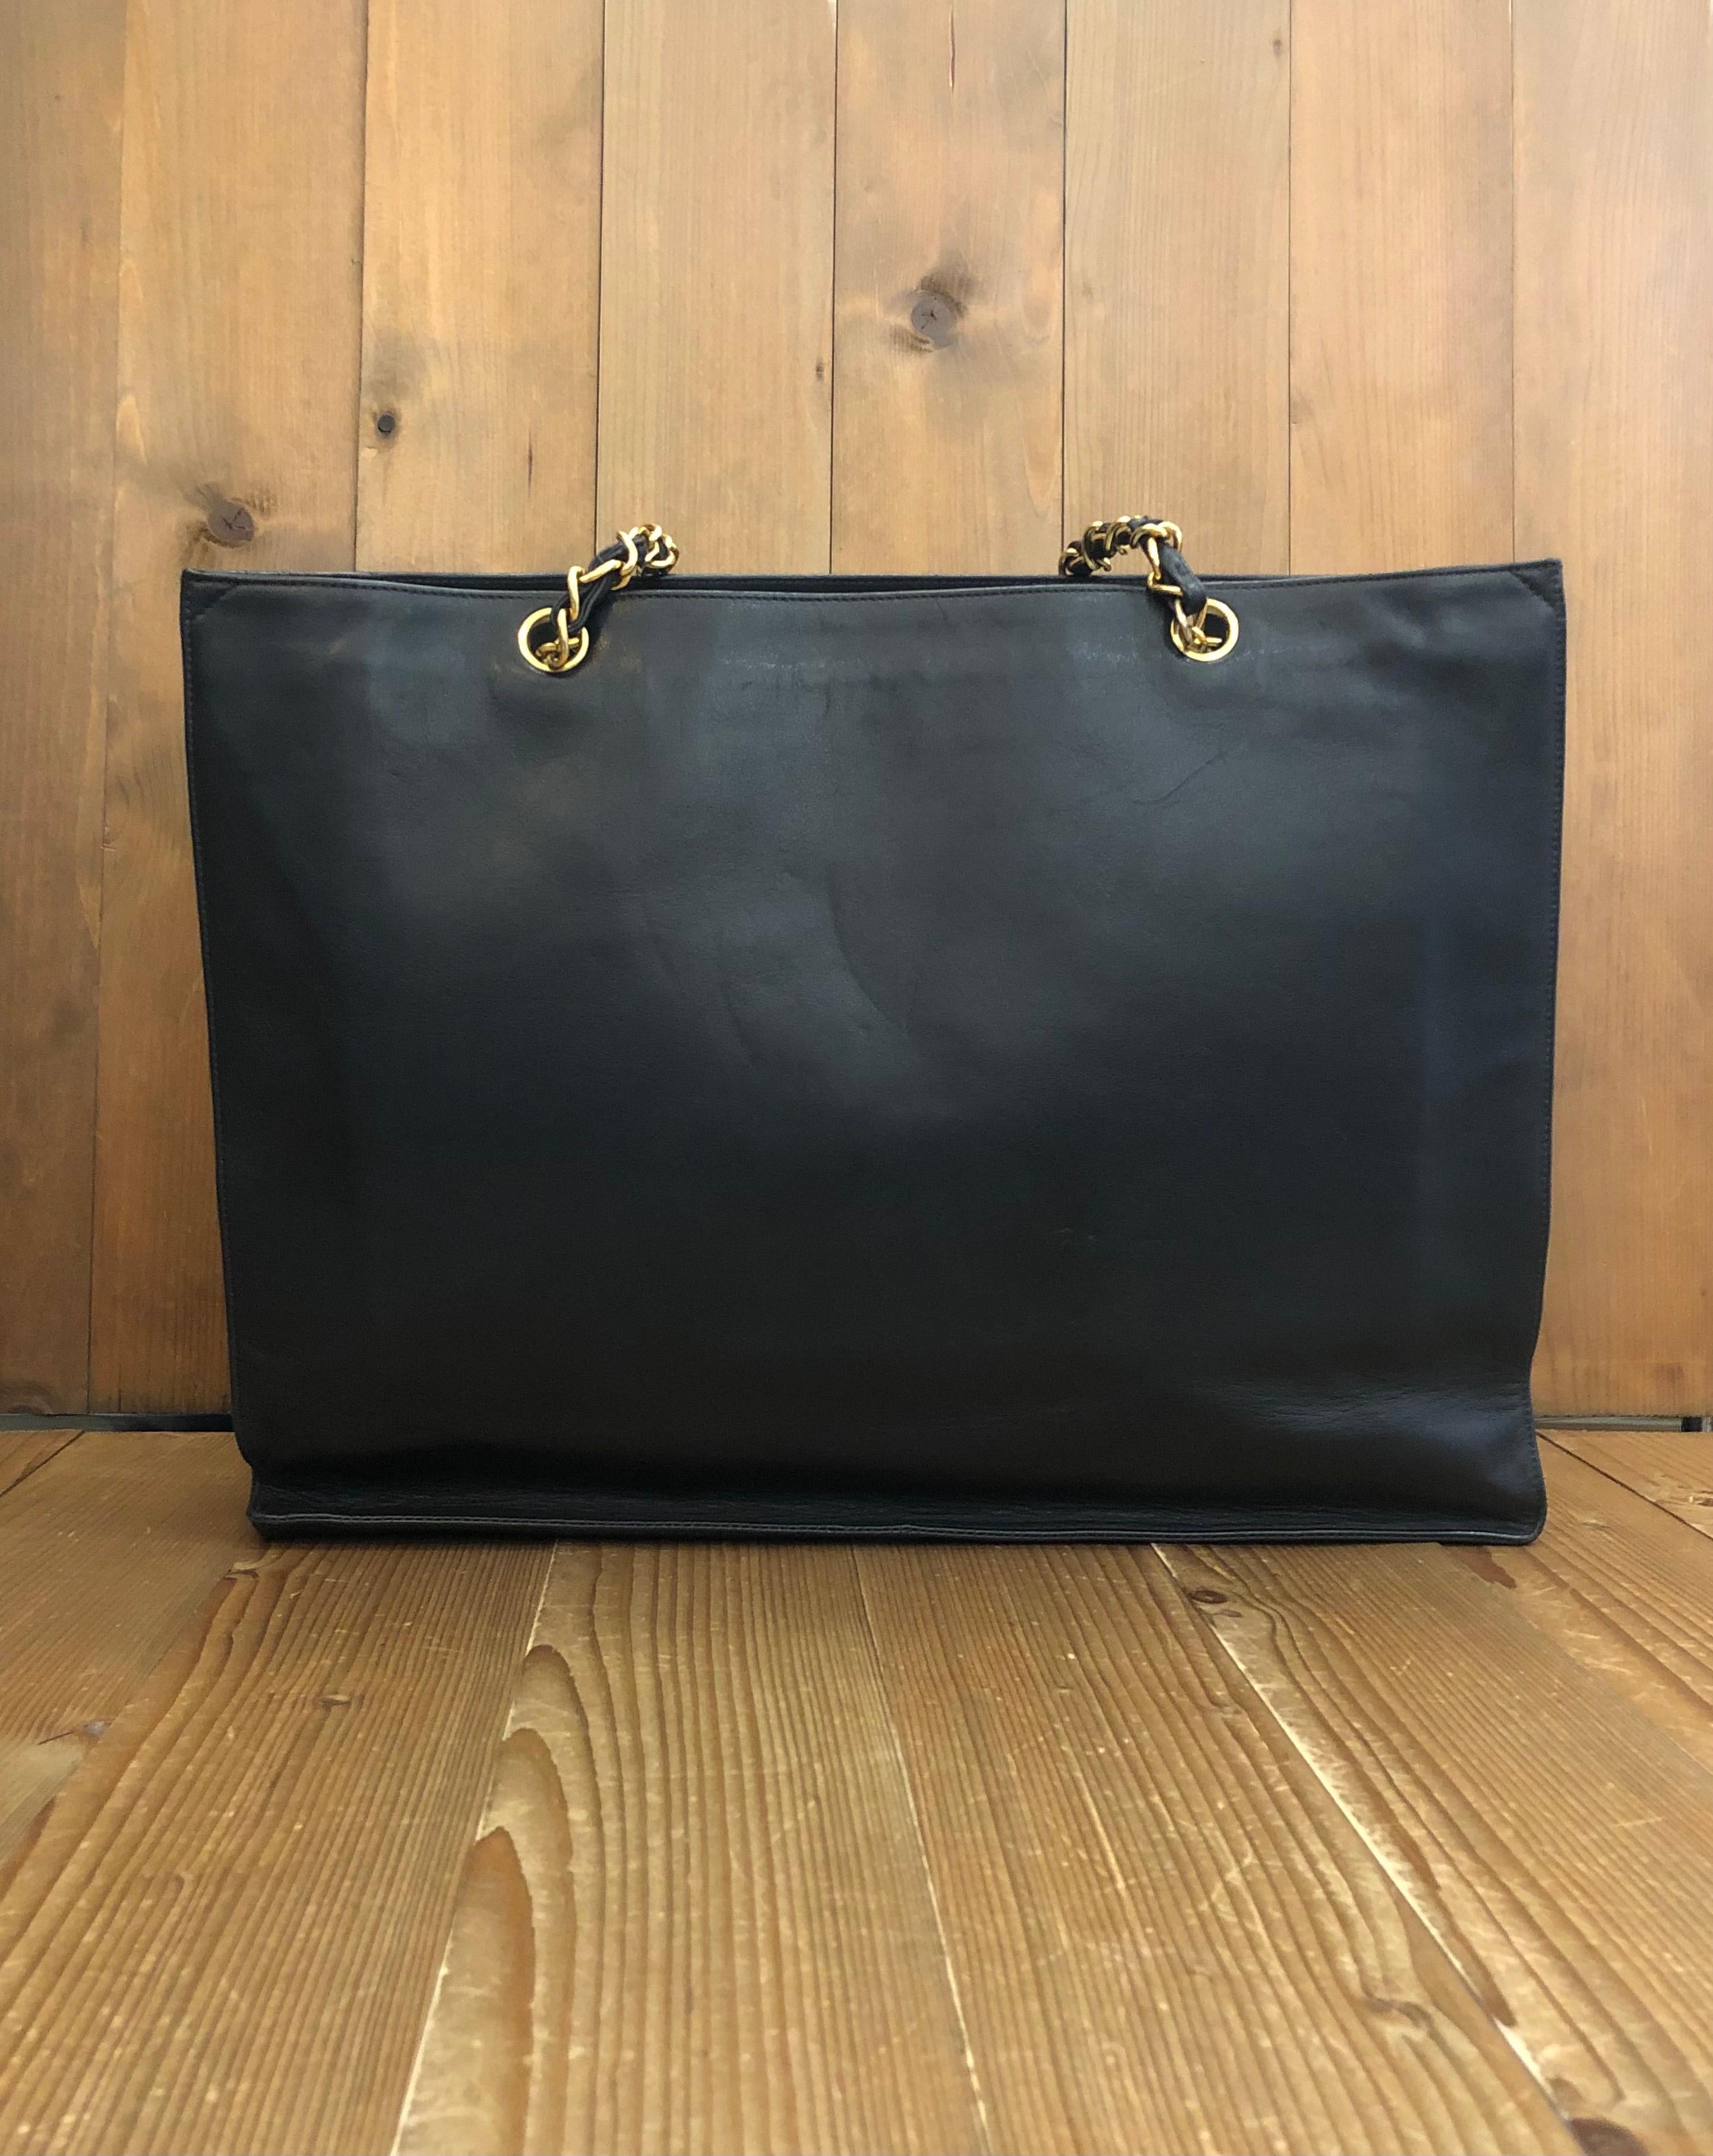 1990s Chanel Jumbo chain tote in black calf leather featuring detachable leather chain straps. Made in France. 4 Series (Serial no illegible). Measures 16 x 12 x 4.25 inches Handle drop 15 inches.

Condition - Some signs of wear consistent with age